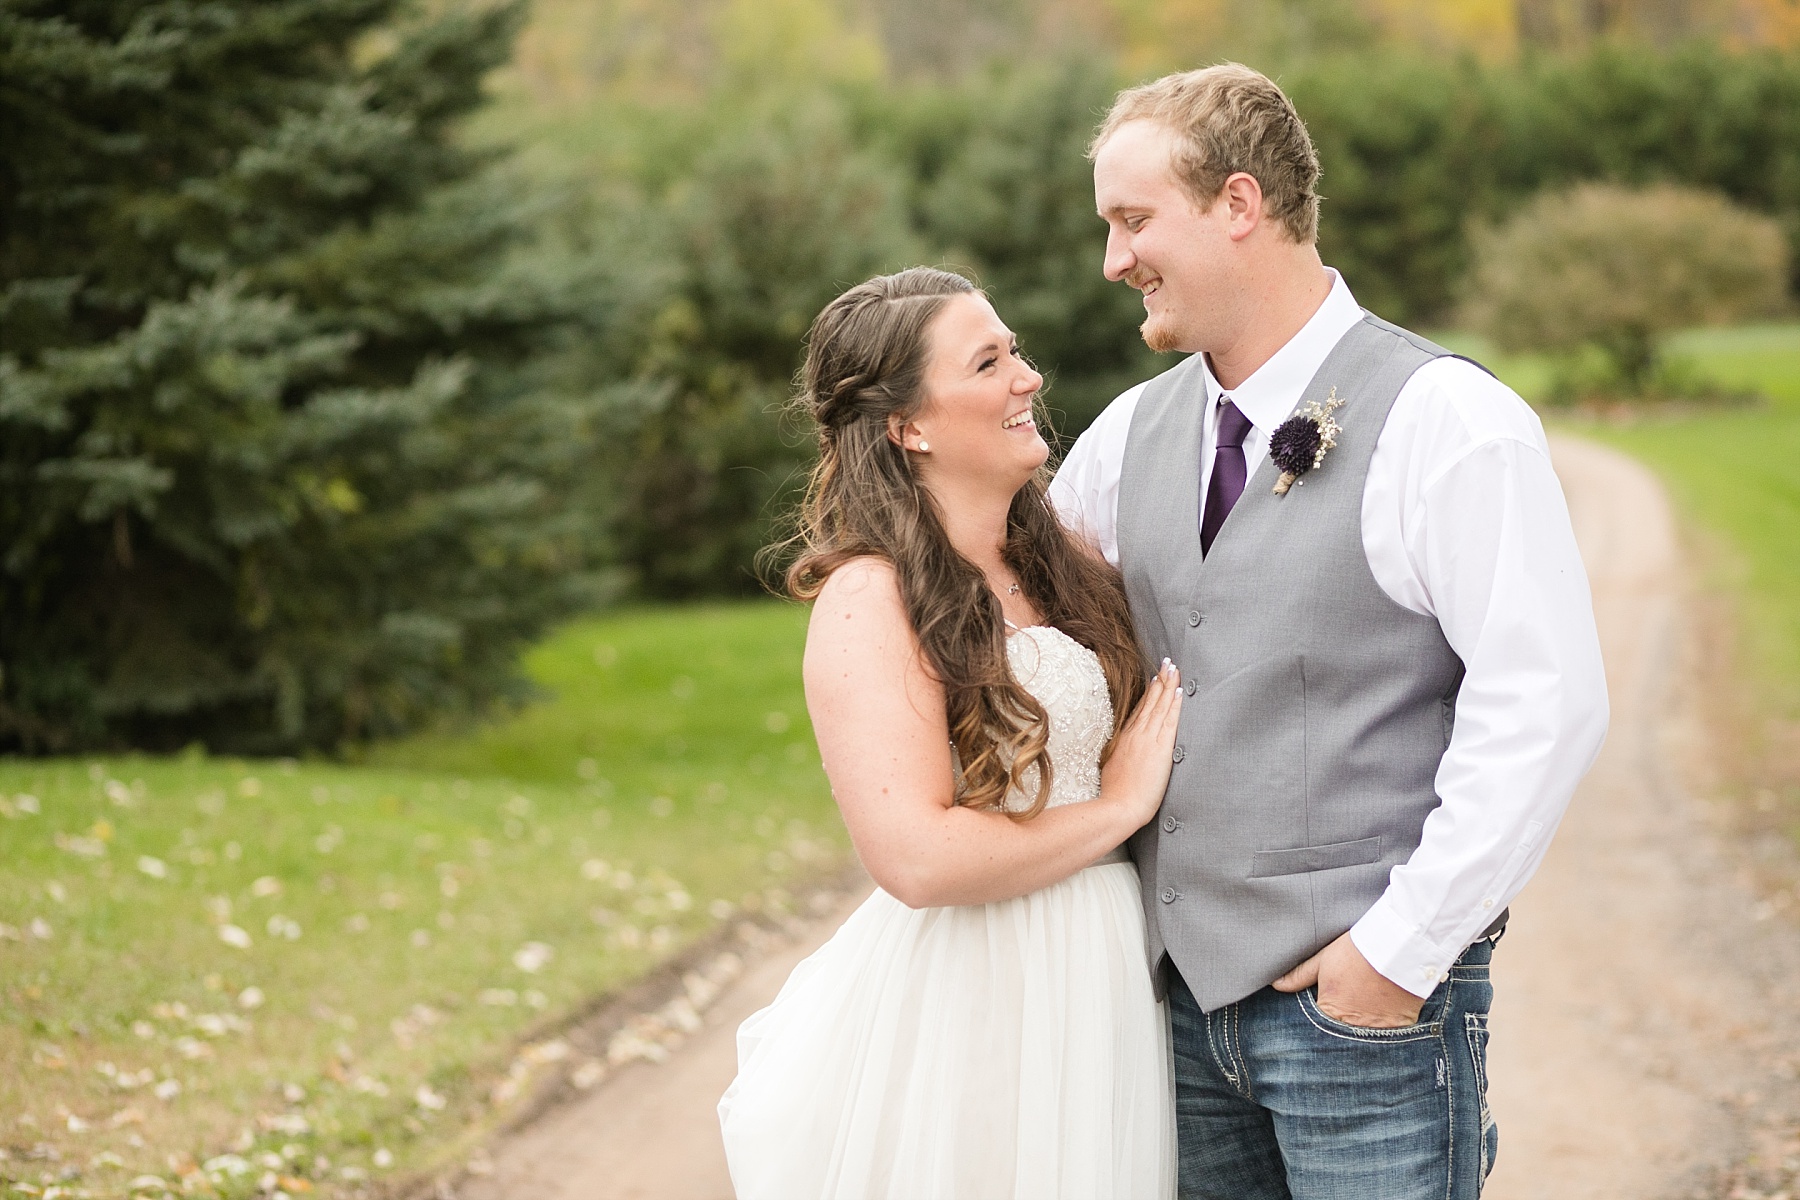 Paris and Shawn were married at The Church Barn wedding venue in Barron, WI